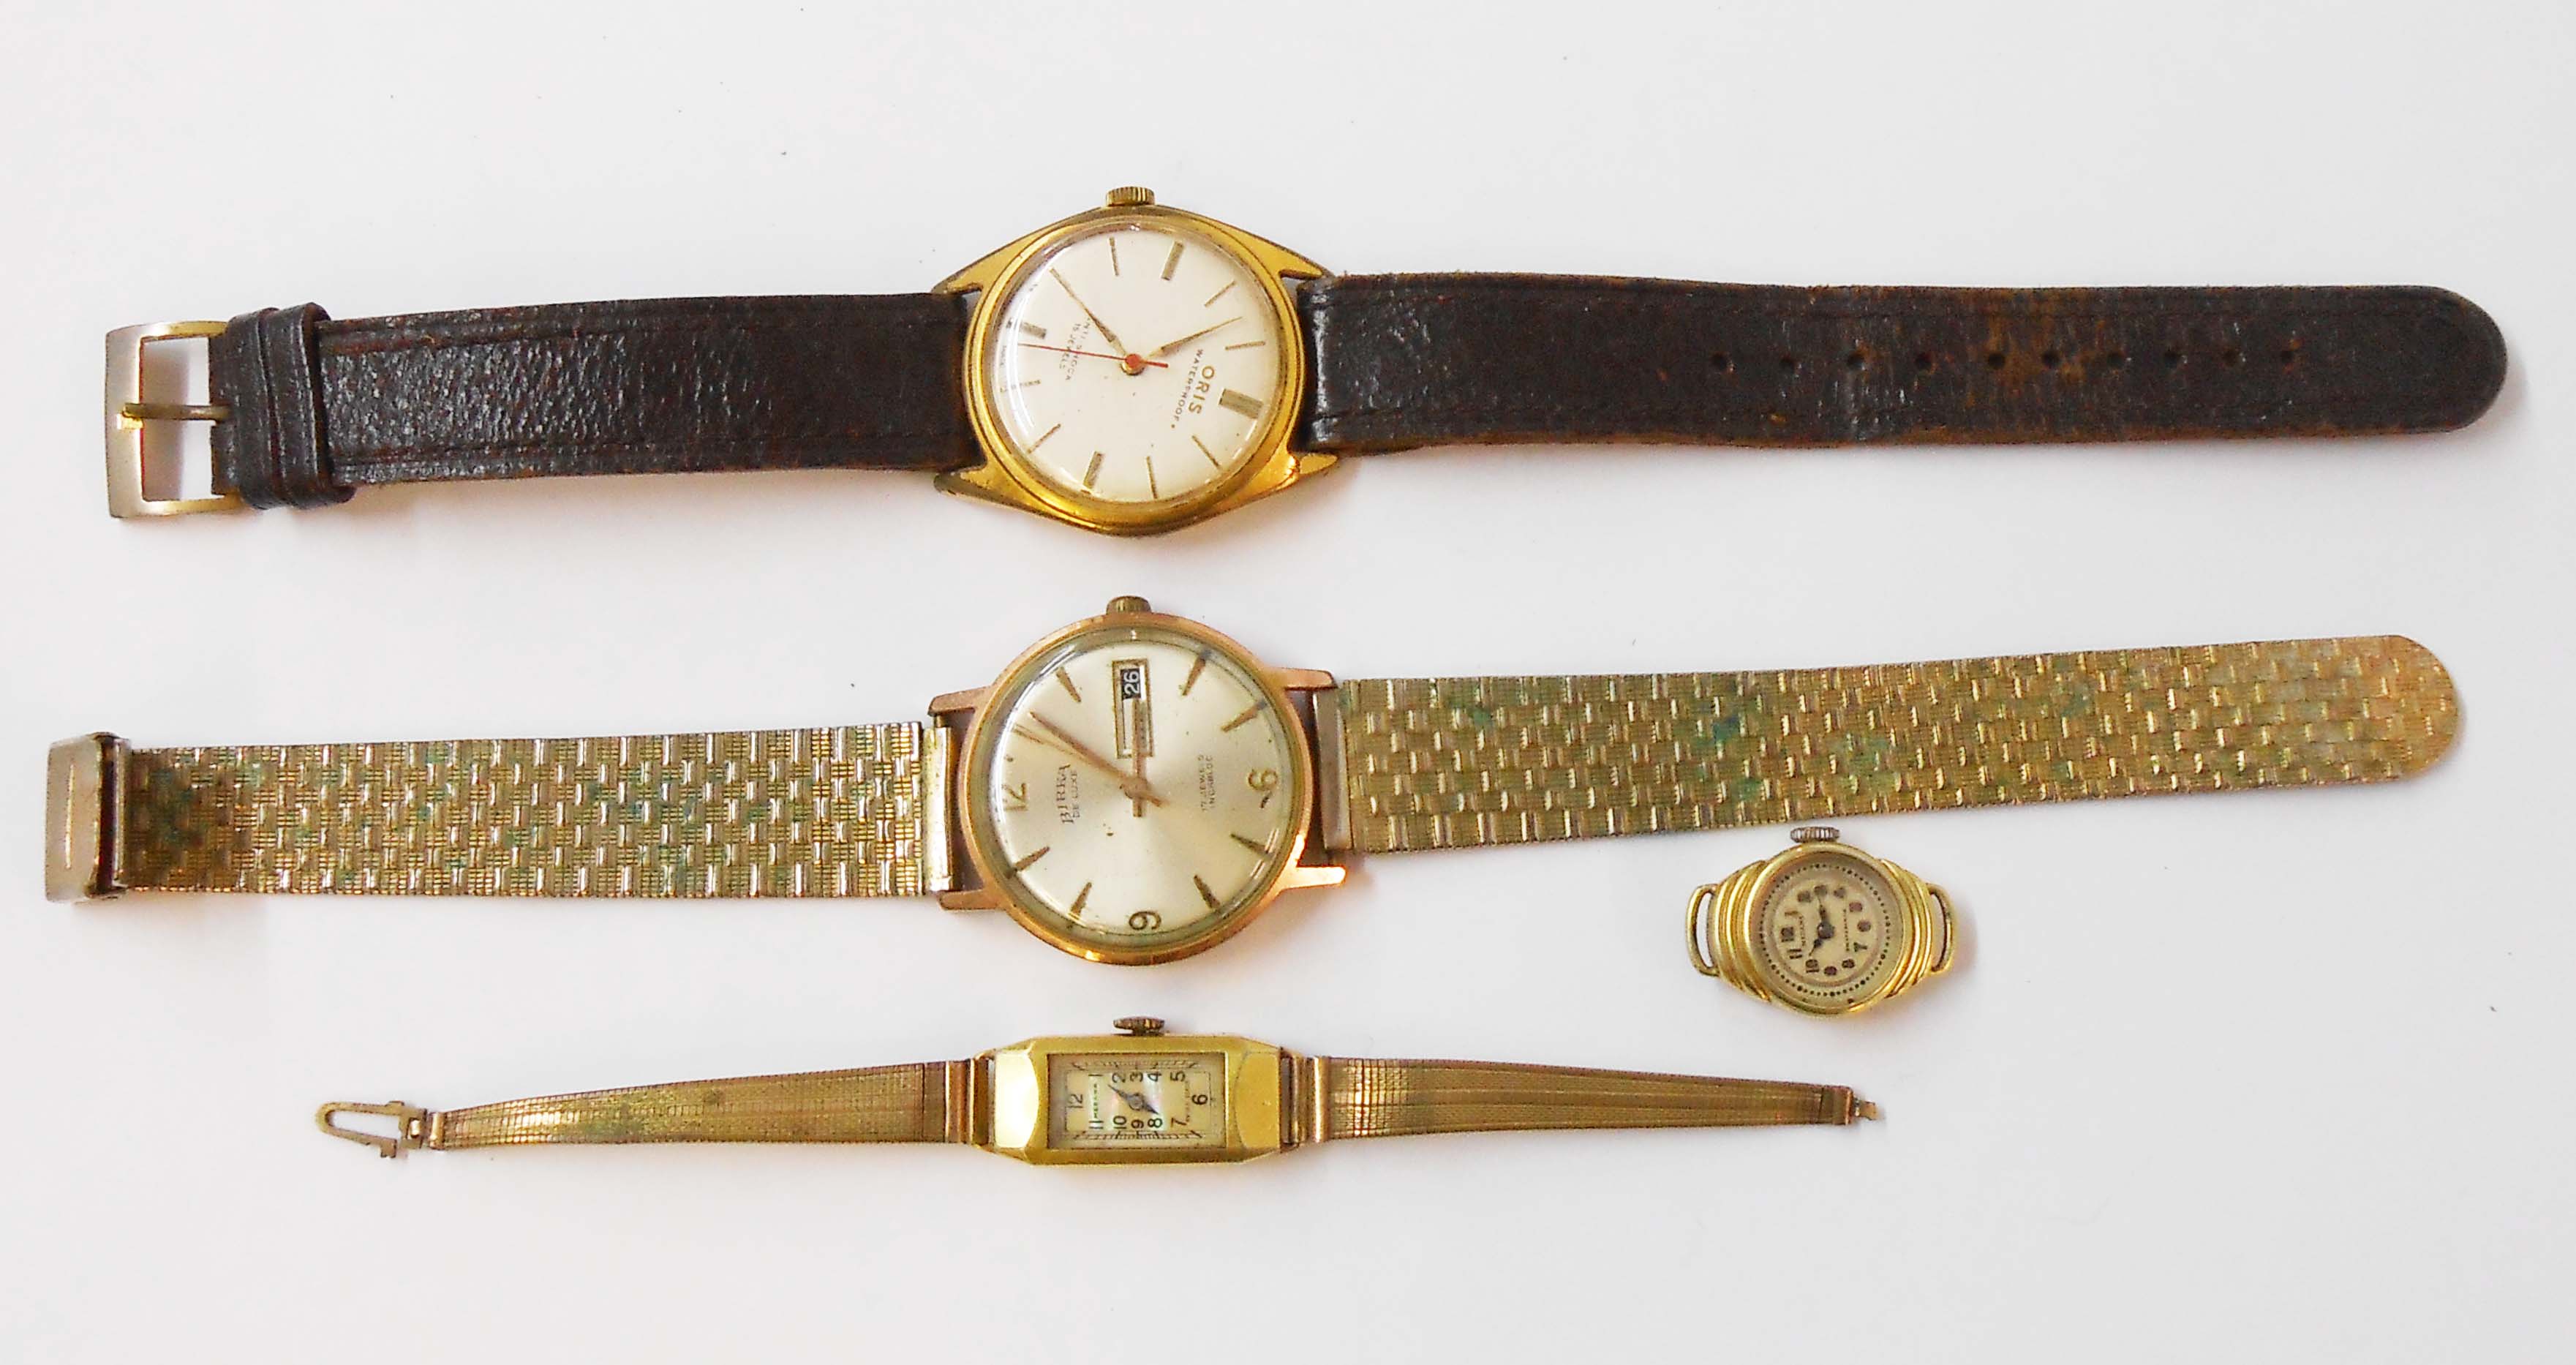 Two vintage gentleman's wristwatches comprising Oris and Birka De Luxe - sold with two vintage